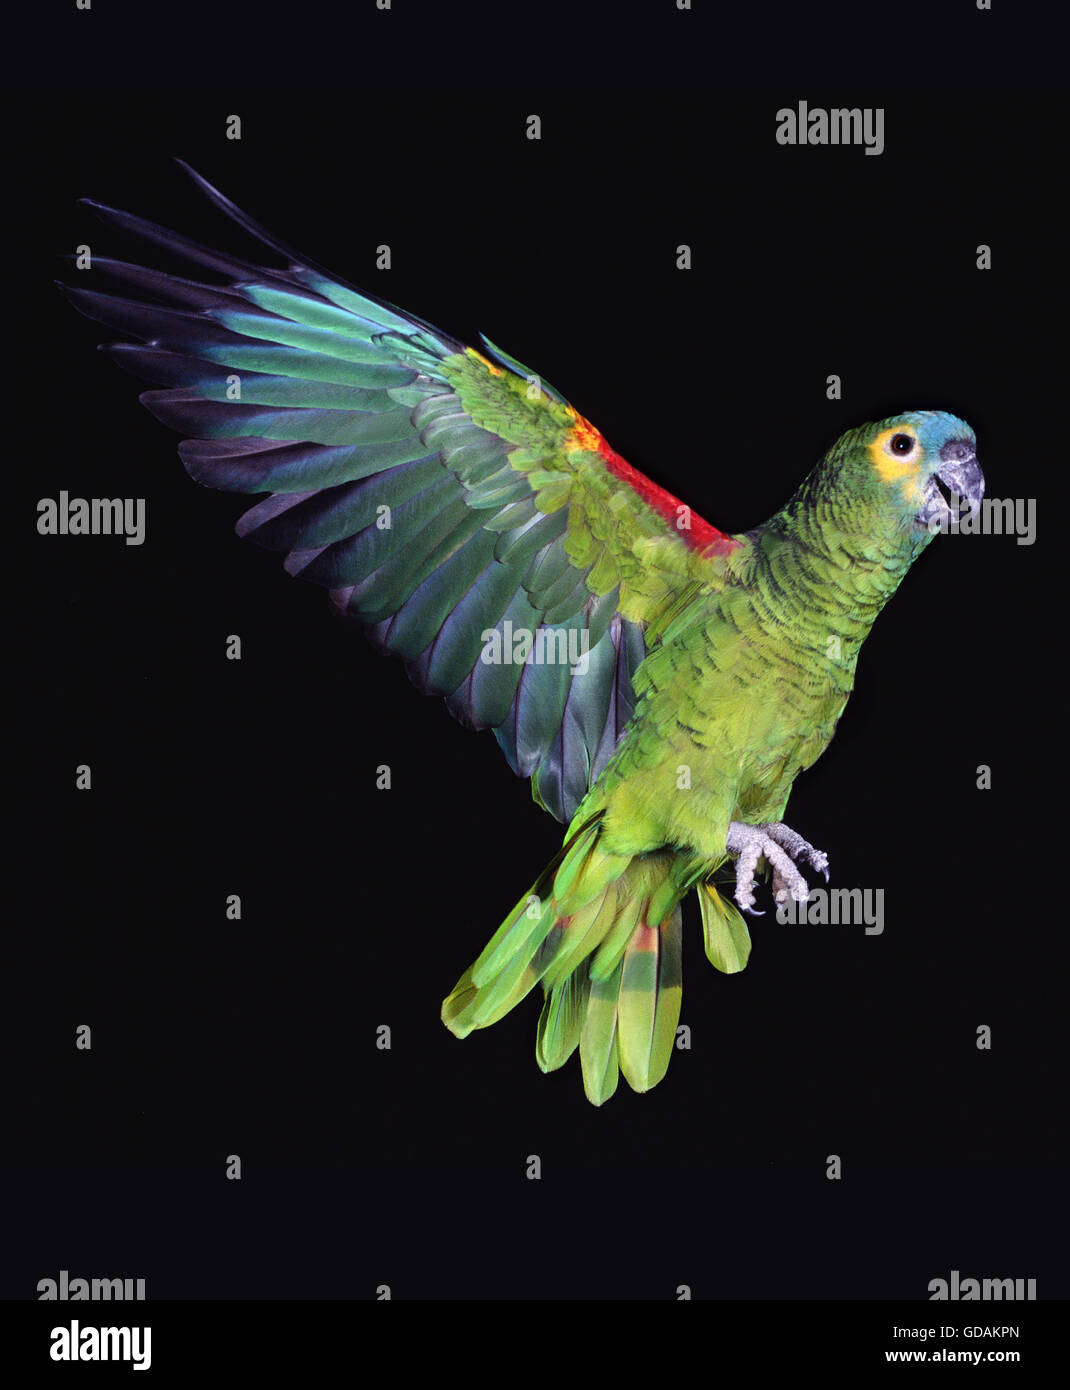 Blue-Fronted Amazon Parrot or Turquoise-Fronted Amazon, amazona aestiva, Adult in Flight against Black Background Stock Photo